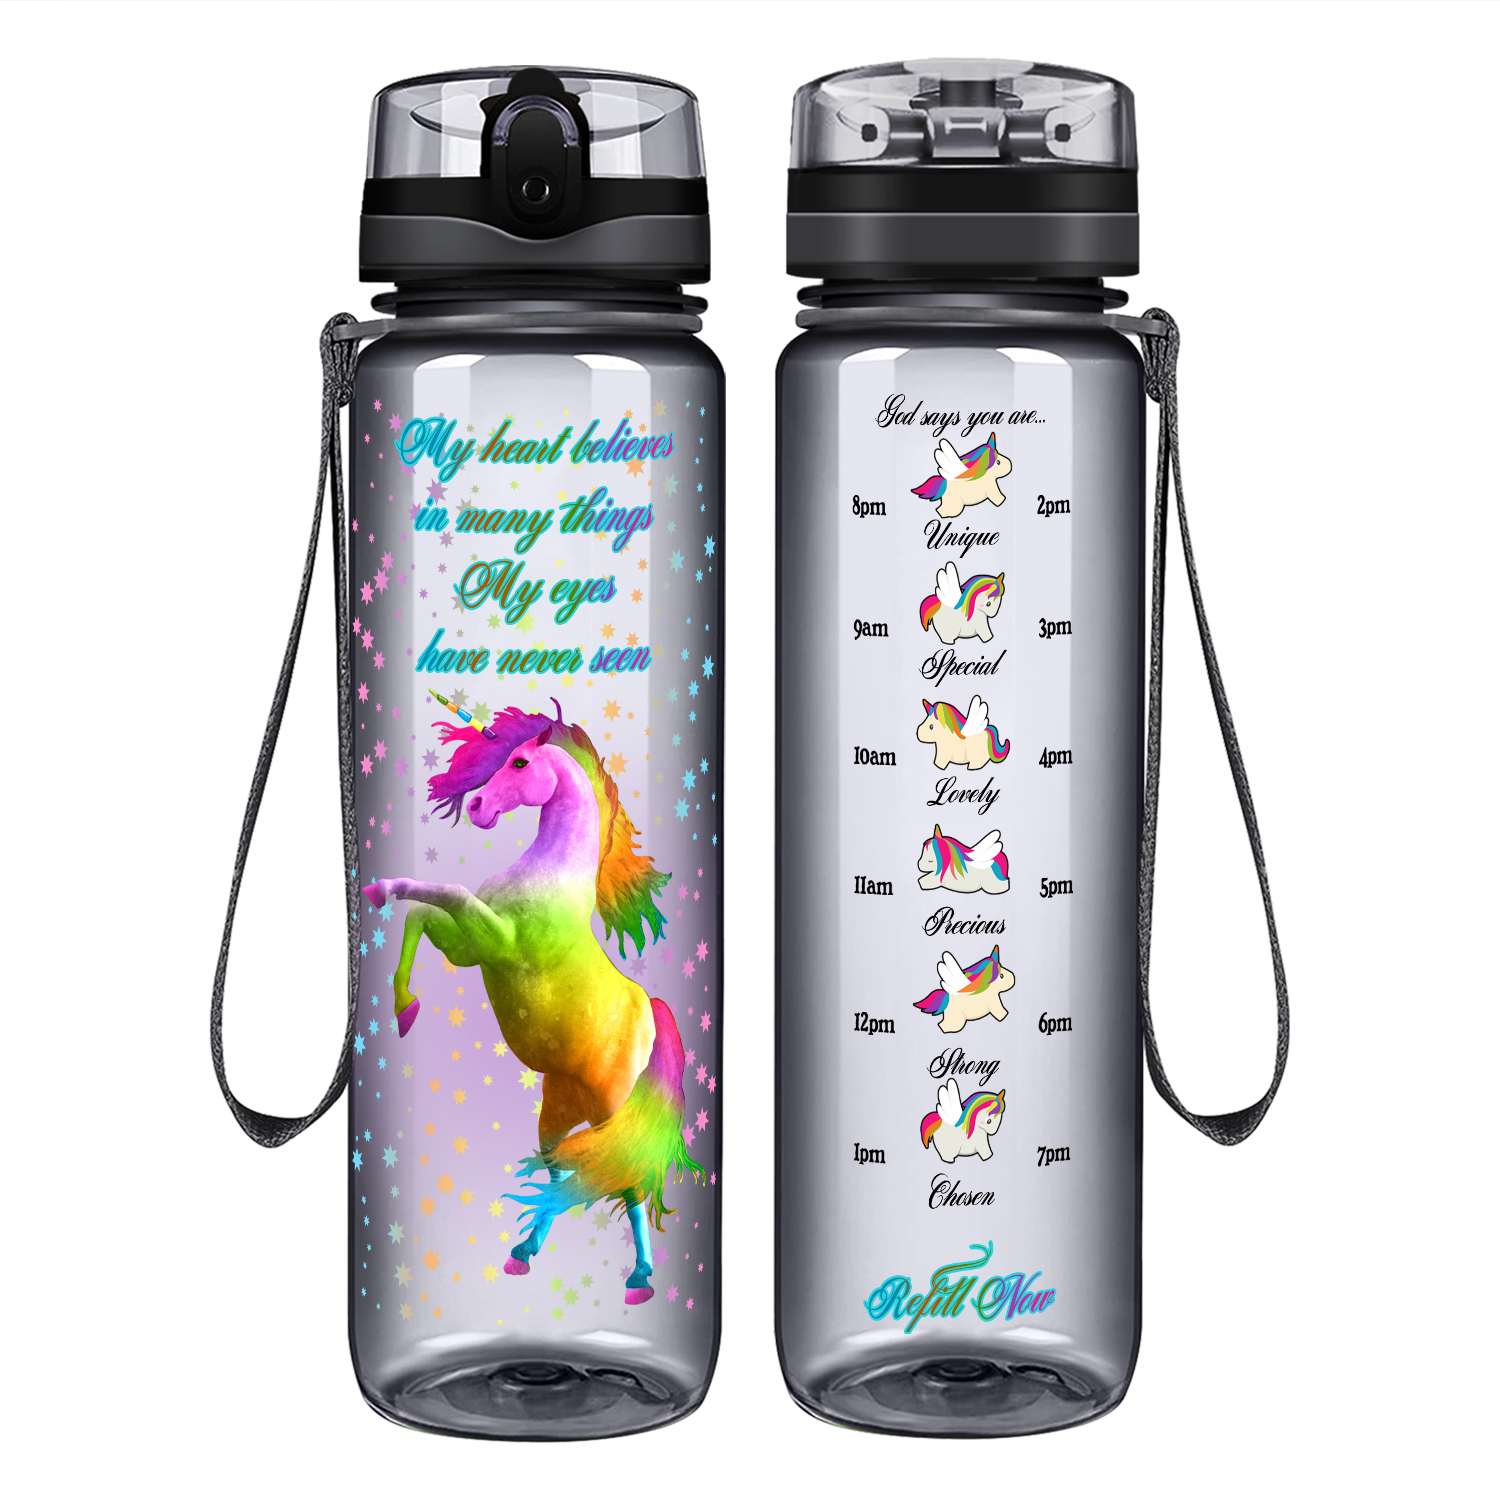 My Heart Believes In Many Things on 32 oz Motivational Tracking Water Bottle